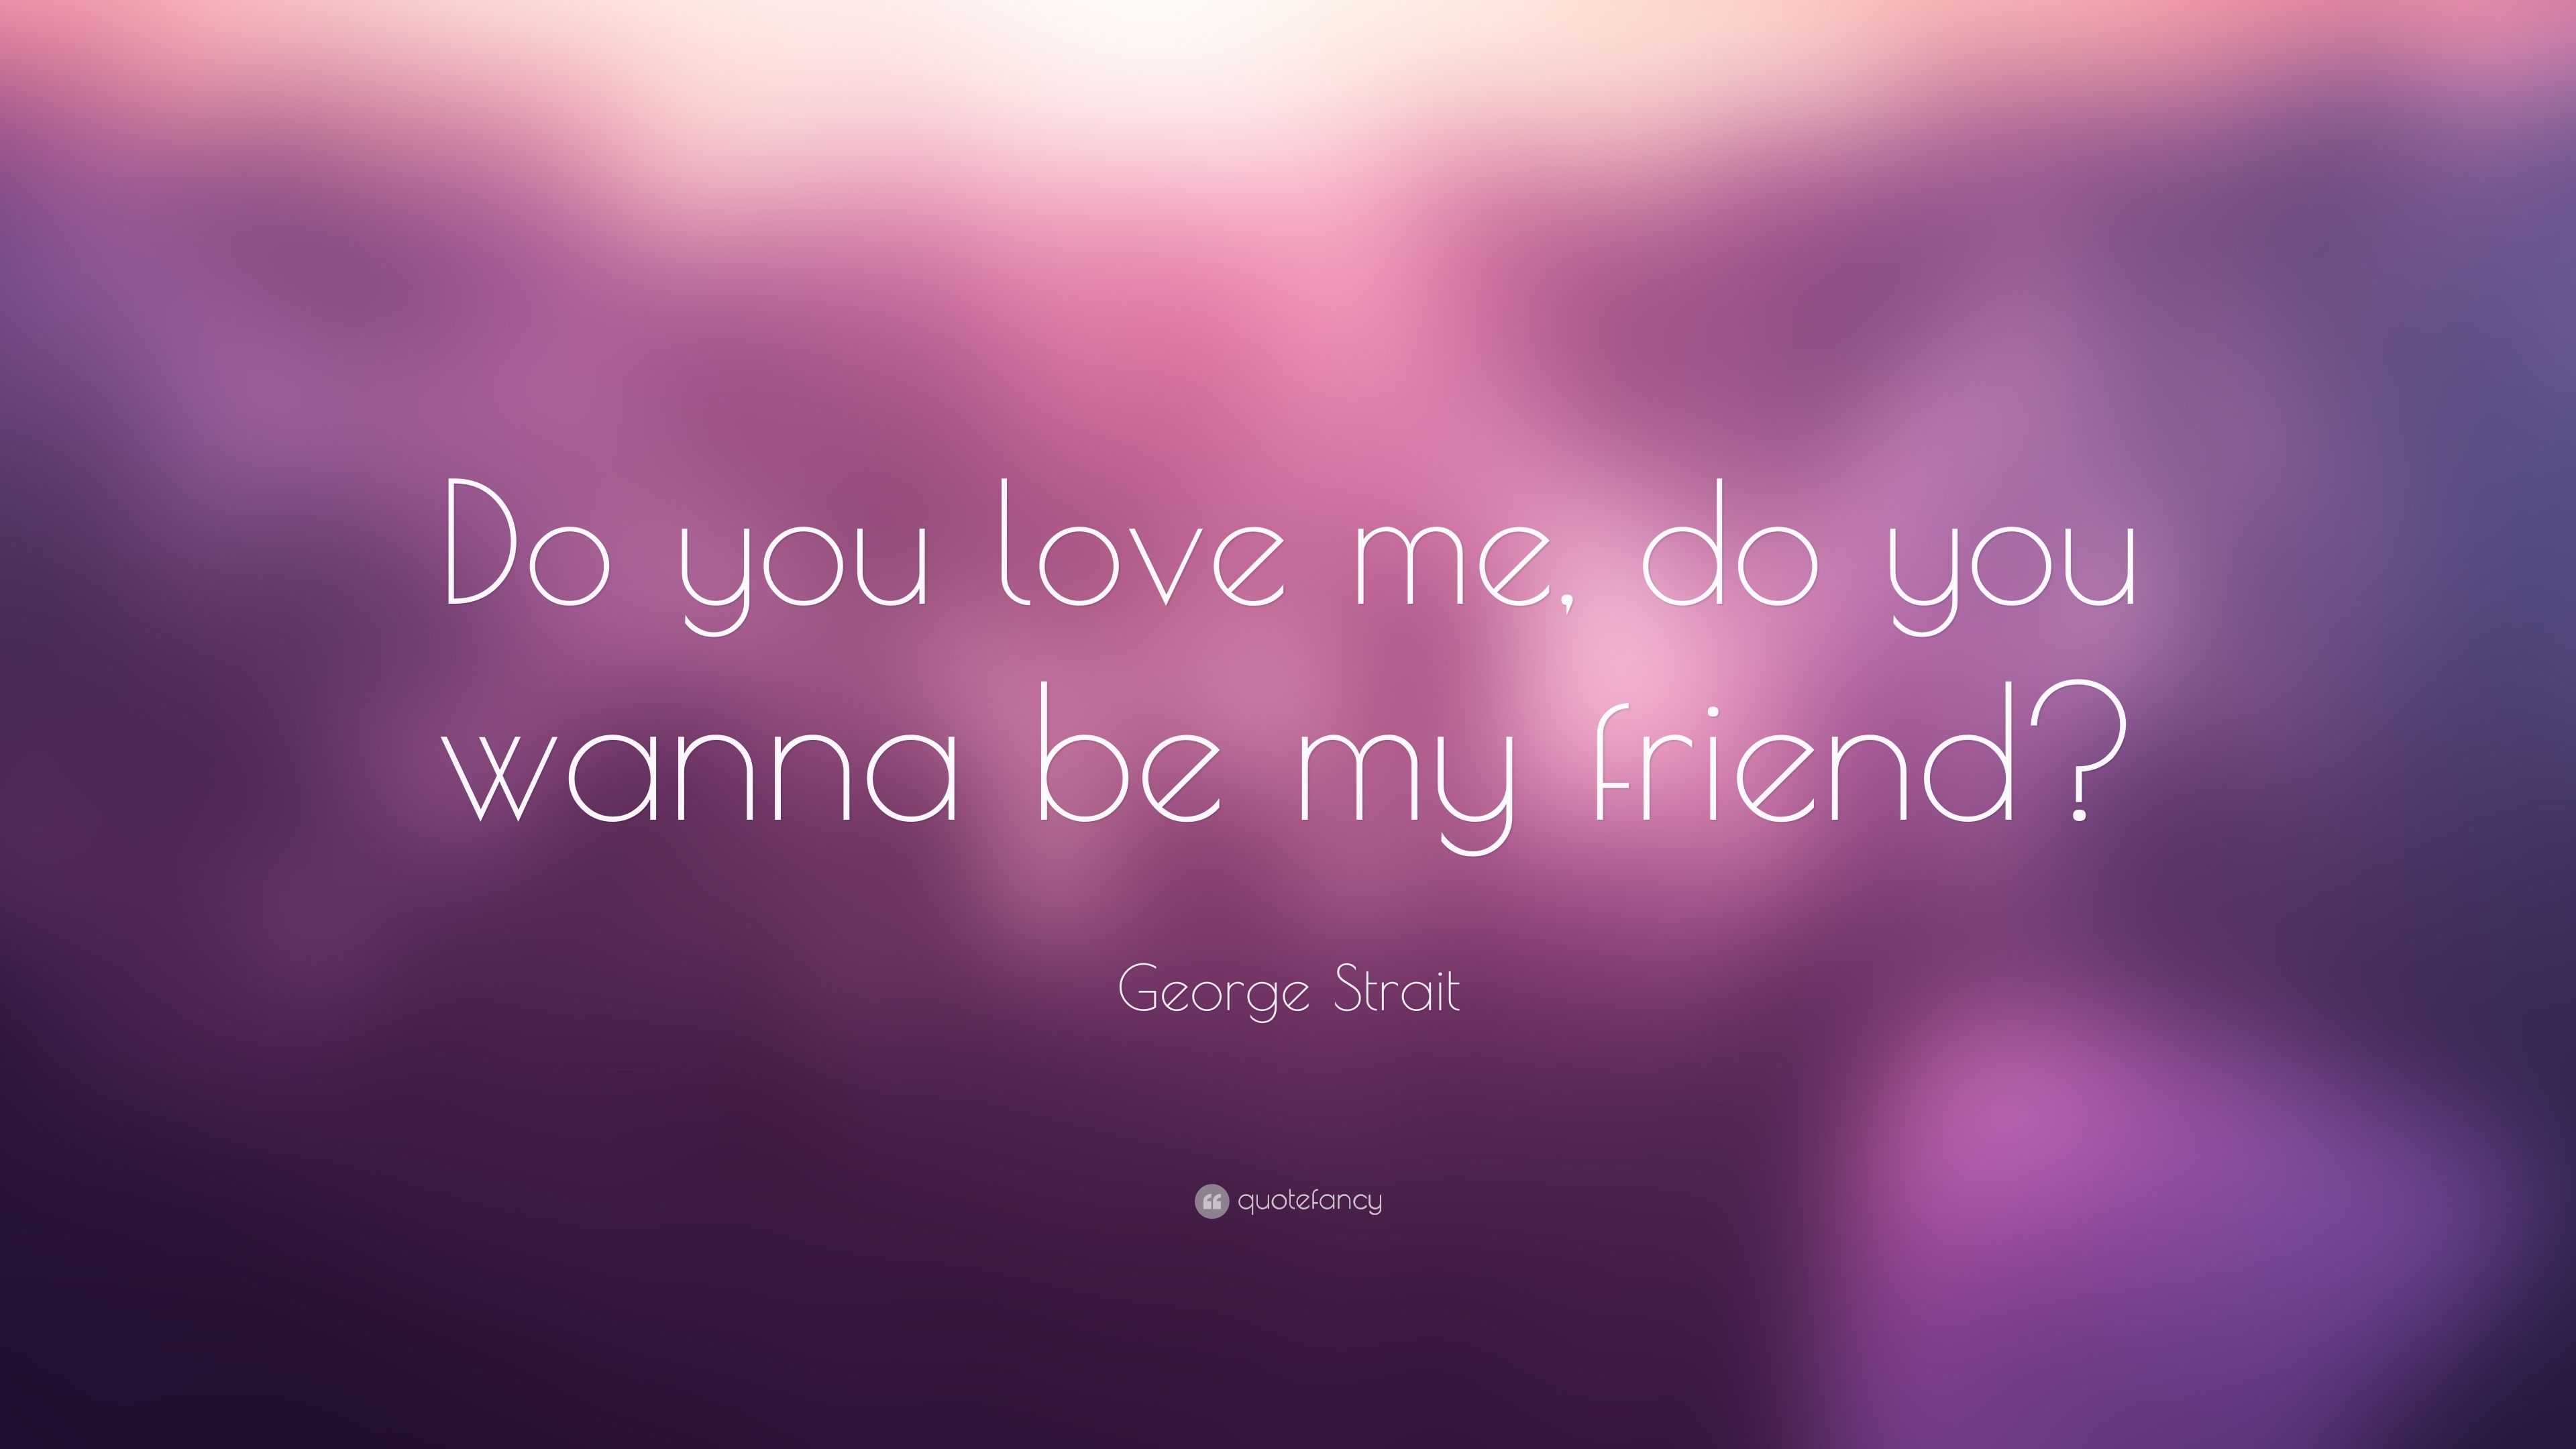 George Strait Quote “Do you love me do you wanna be my friend